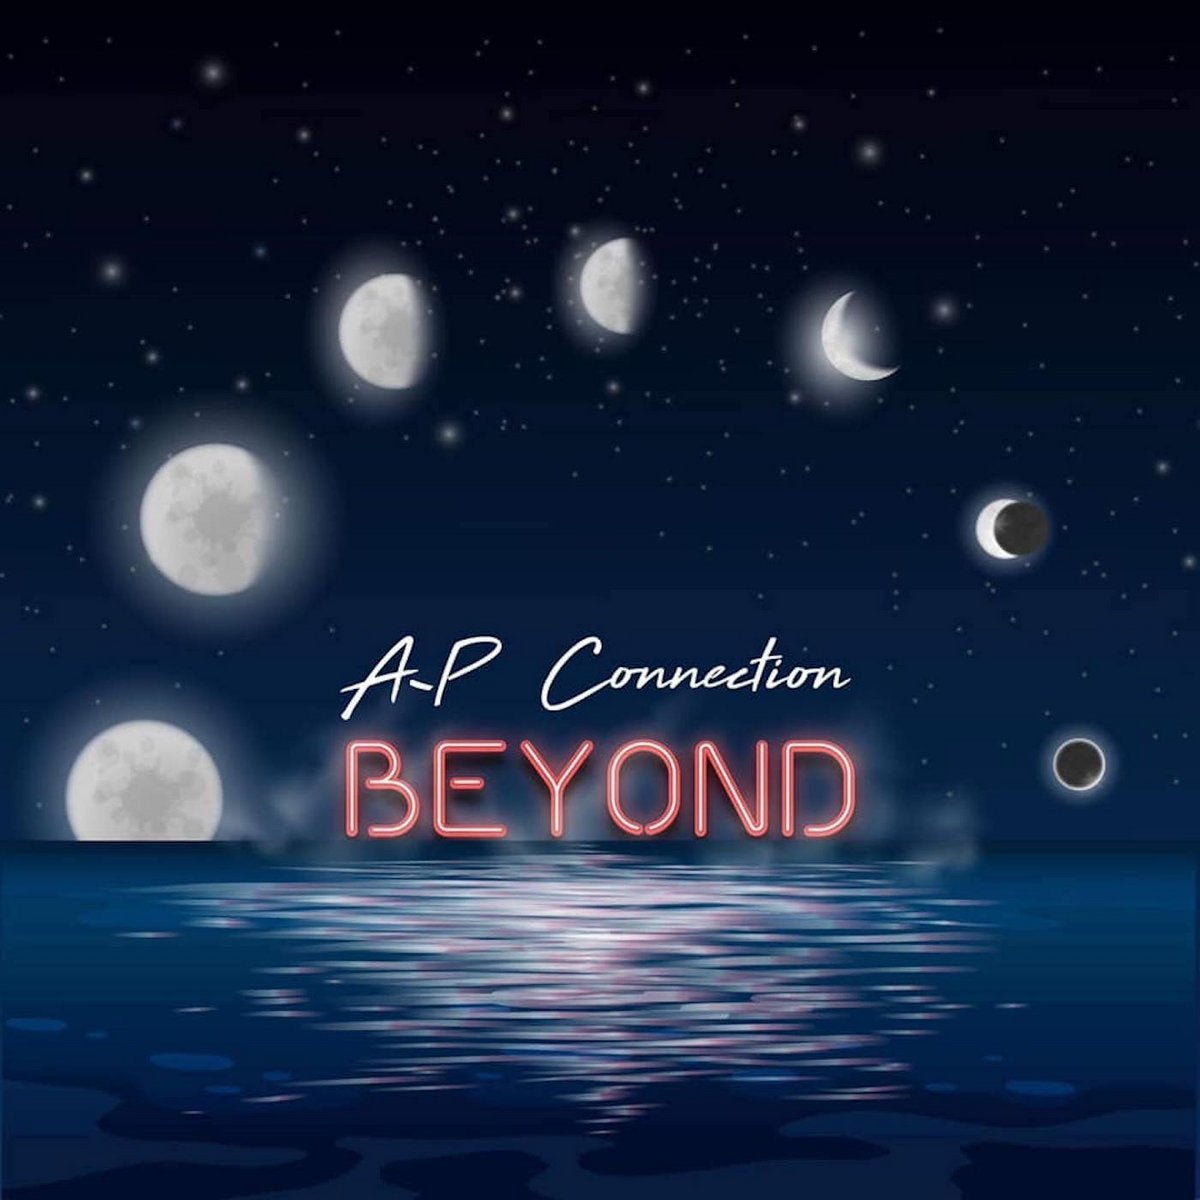 A-P Connection - Beyond